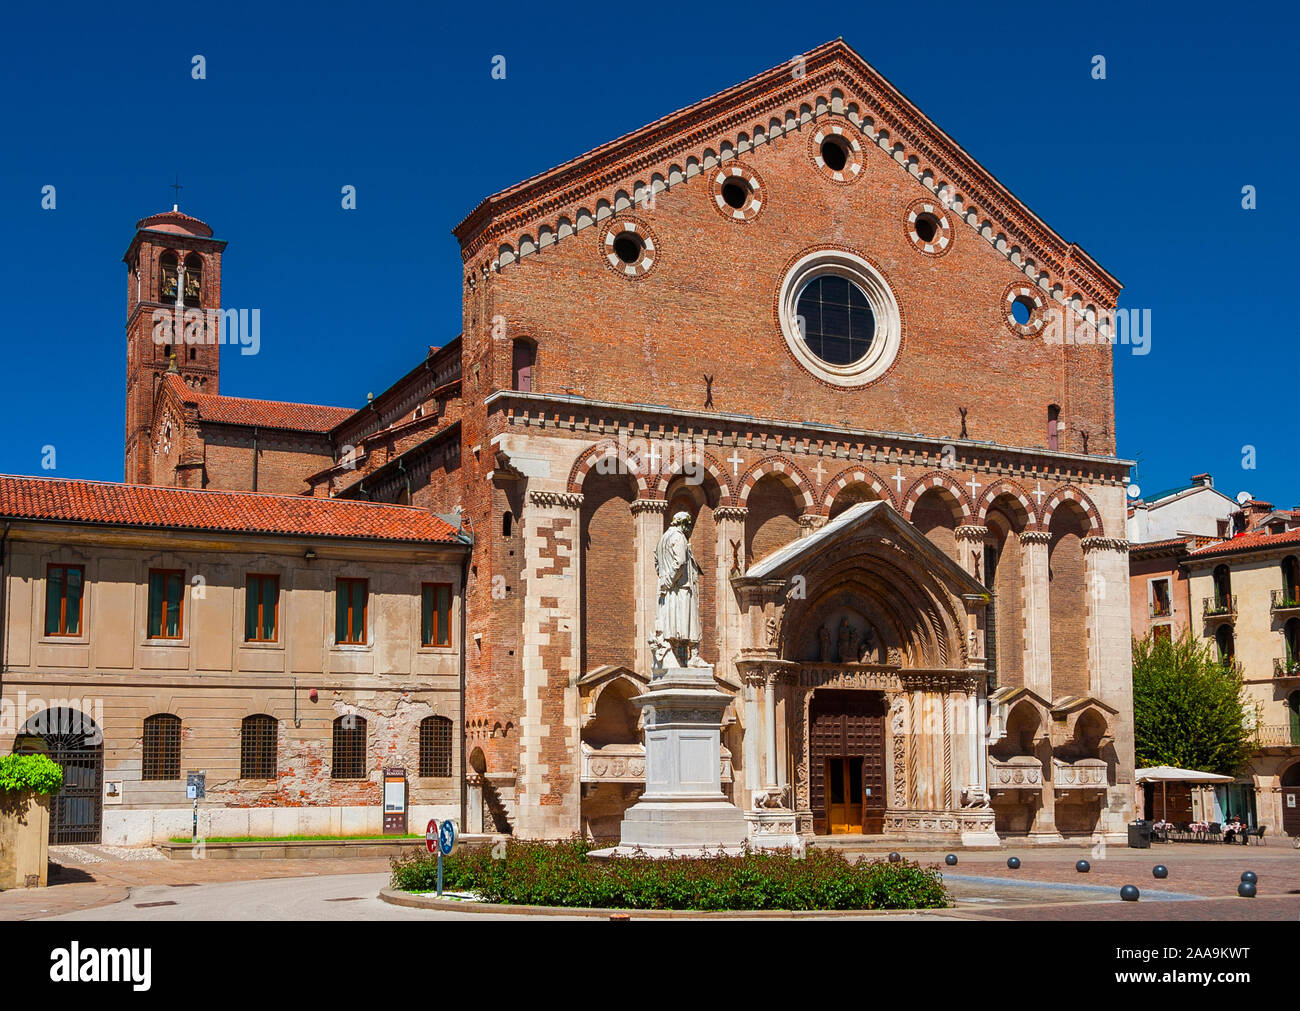 St Lawrence medieval gothic church in Vicenza city center, erected in 13th century Stock Photo